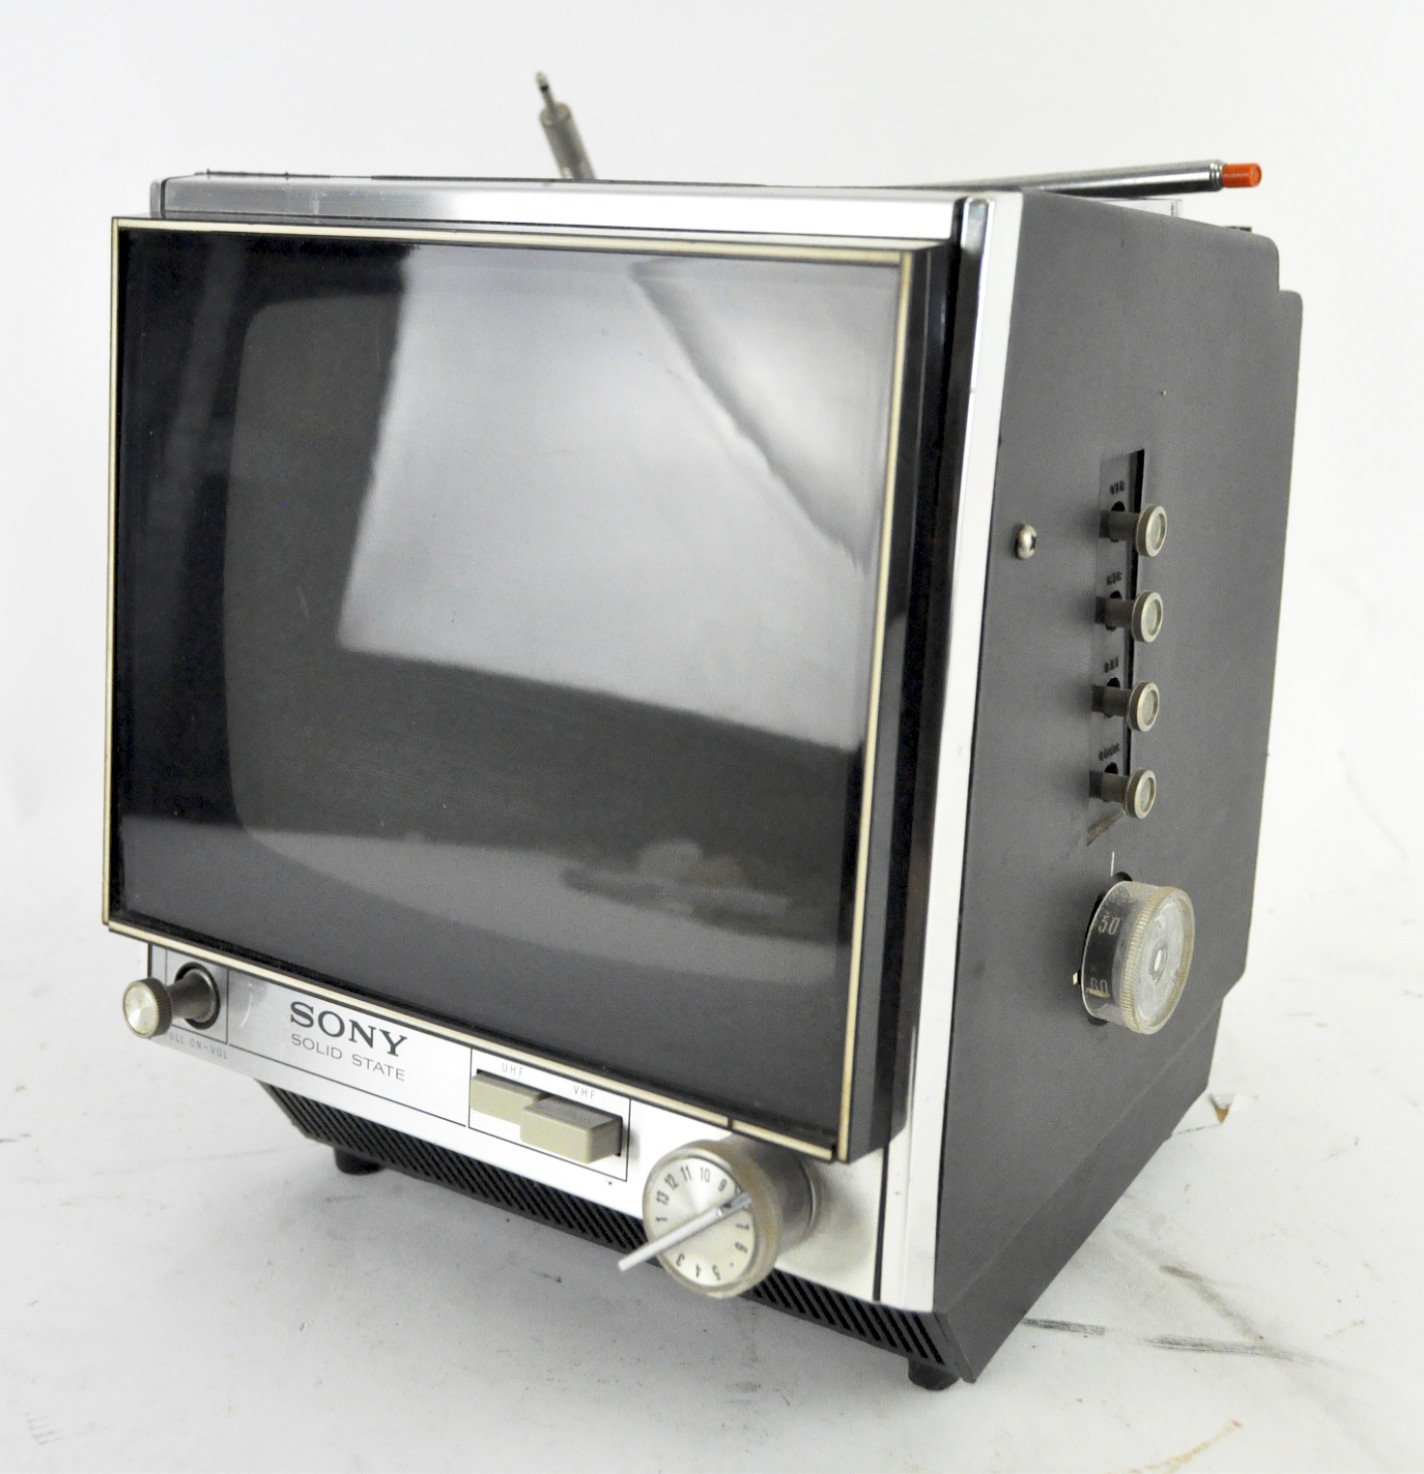 A Sony miniature television